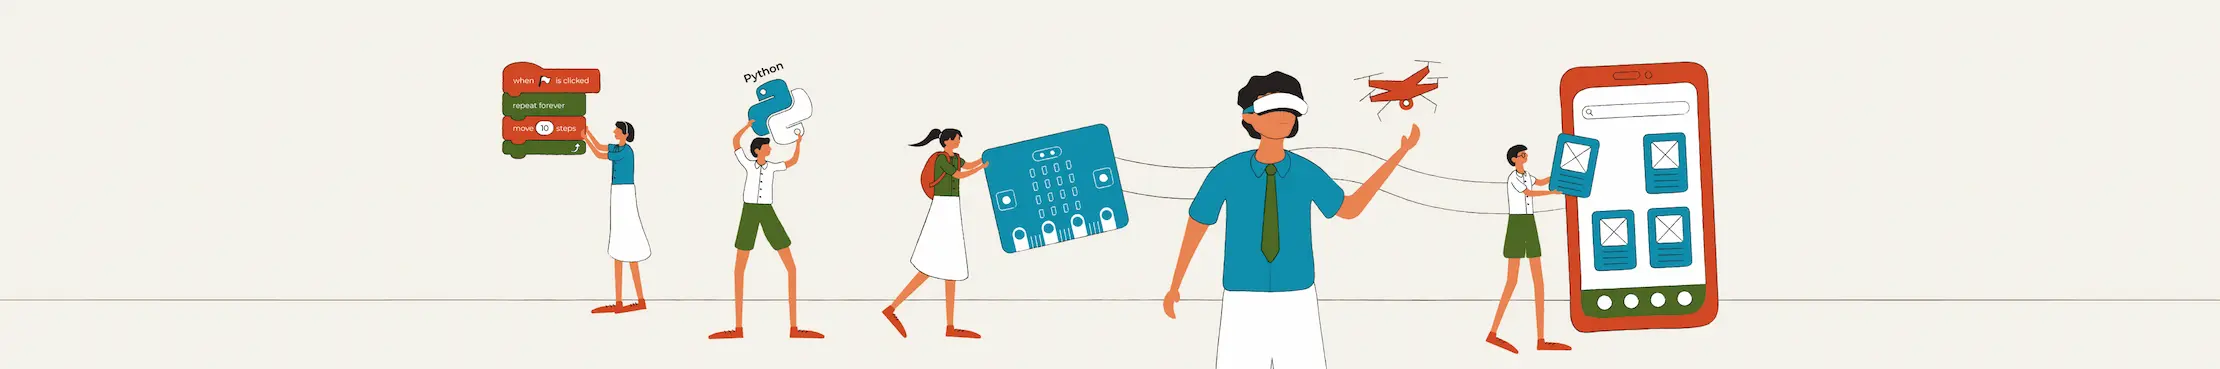 The illustration features five students engaged in diverse coding-related activities, symbolising the core of computational thinking.   Their involvement in activities like using VR goggles and flying a drone highlights the availability of various programs.   Reinforcing the concept of skill development through coding education.